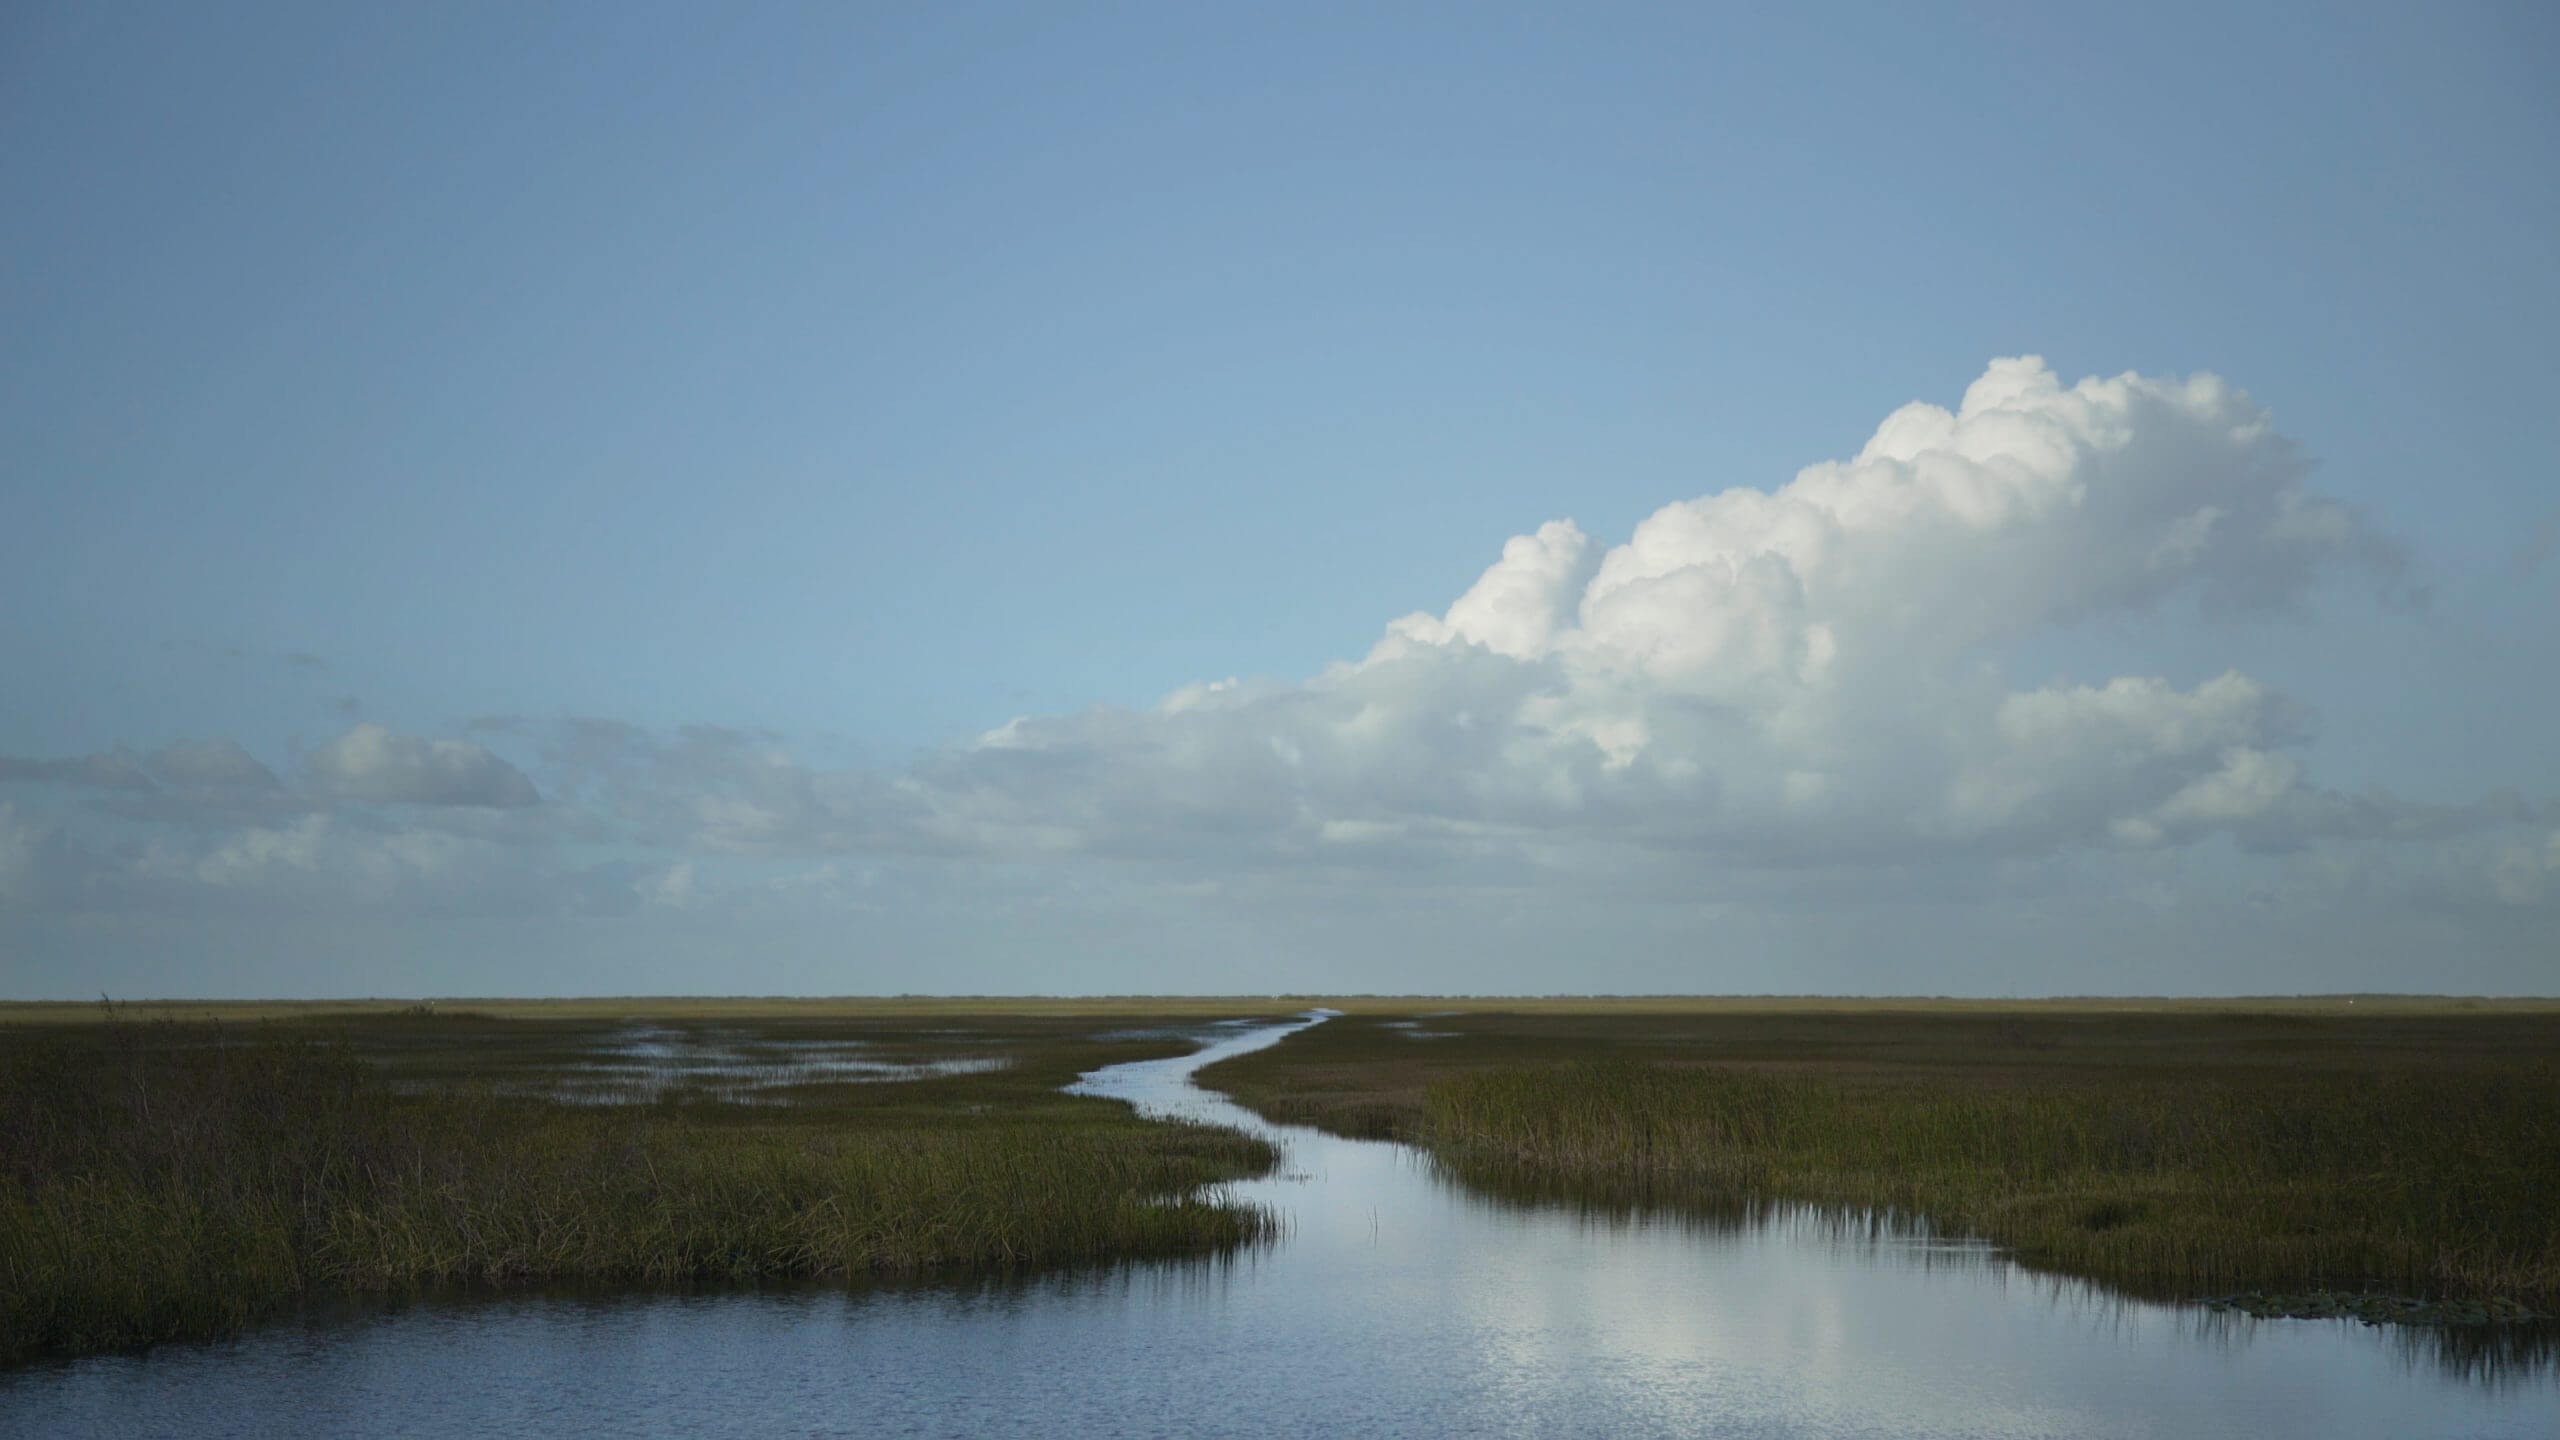 An expanse of water and sawgrass beneath a blue sky and large clouds